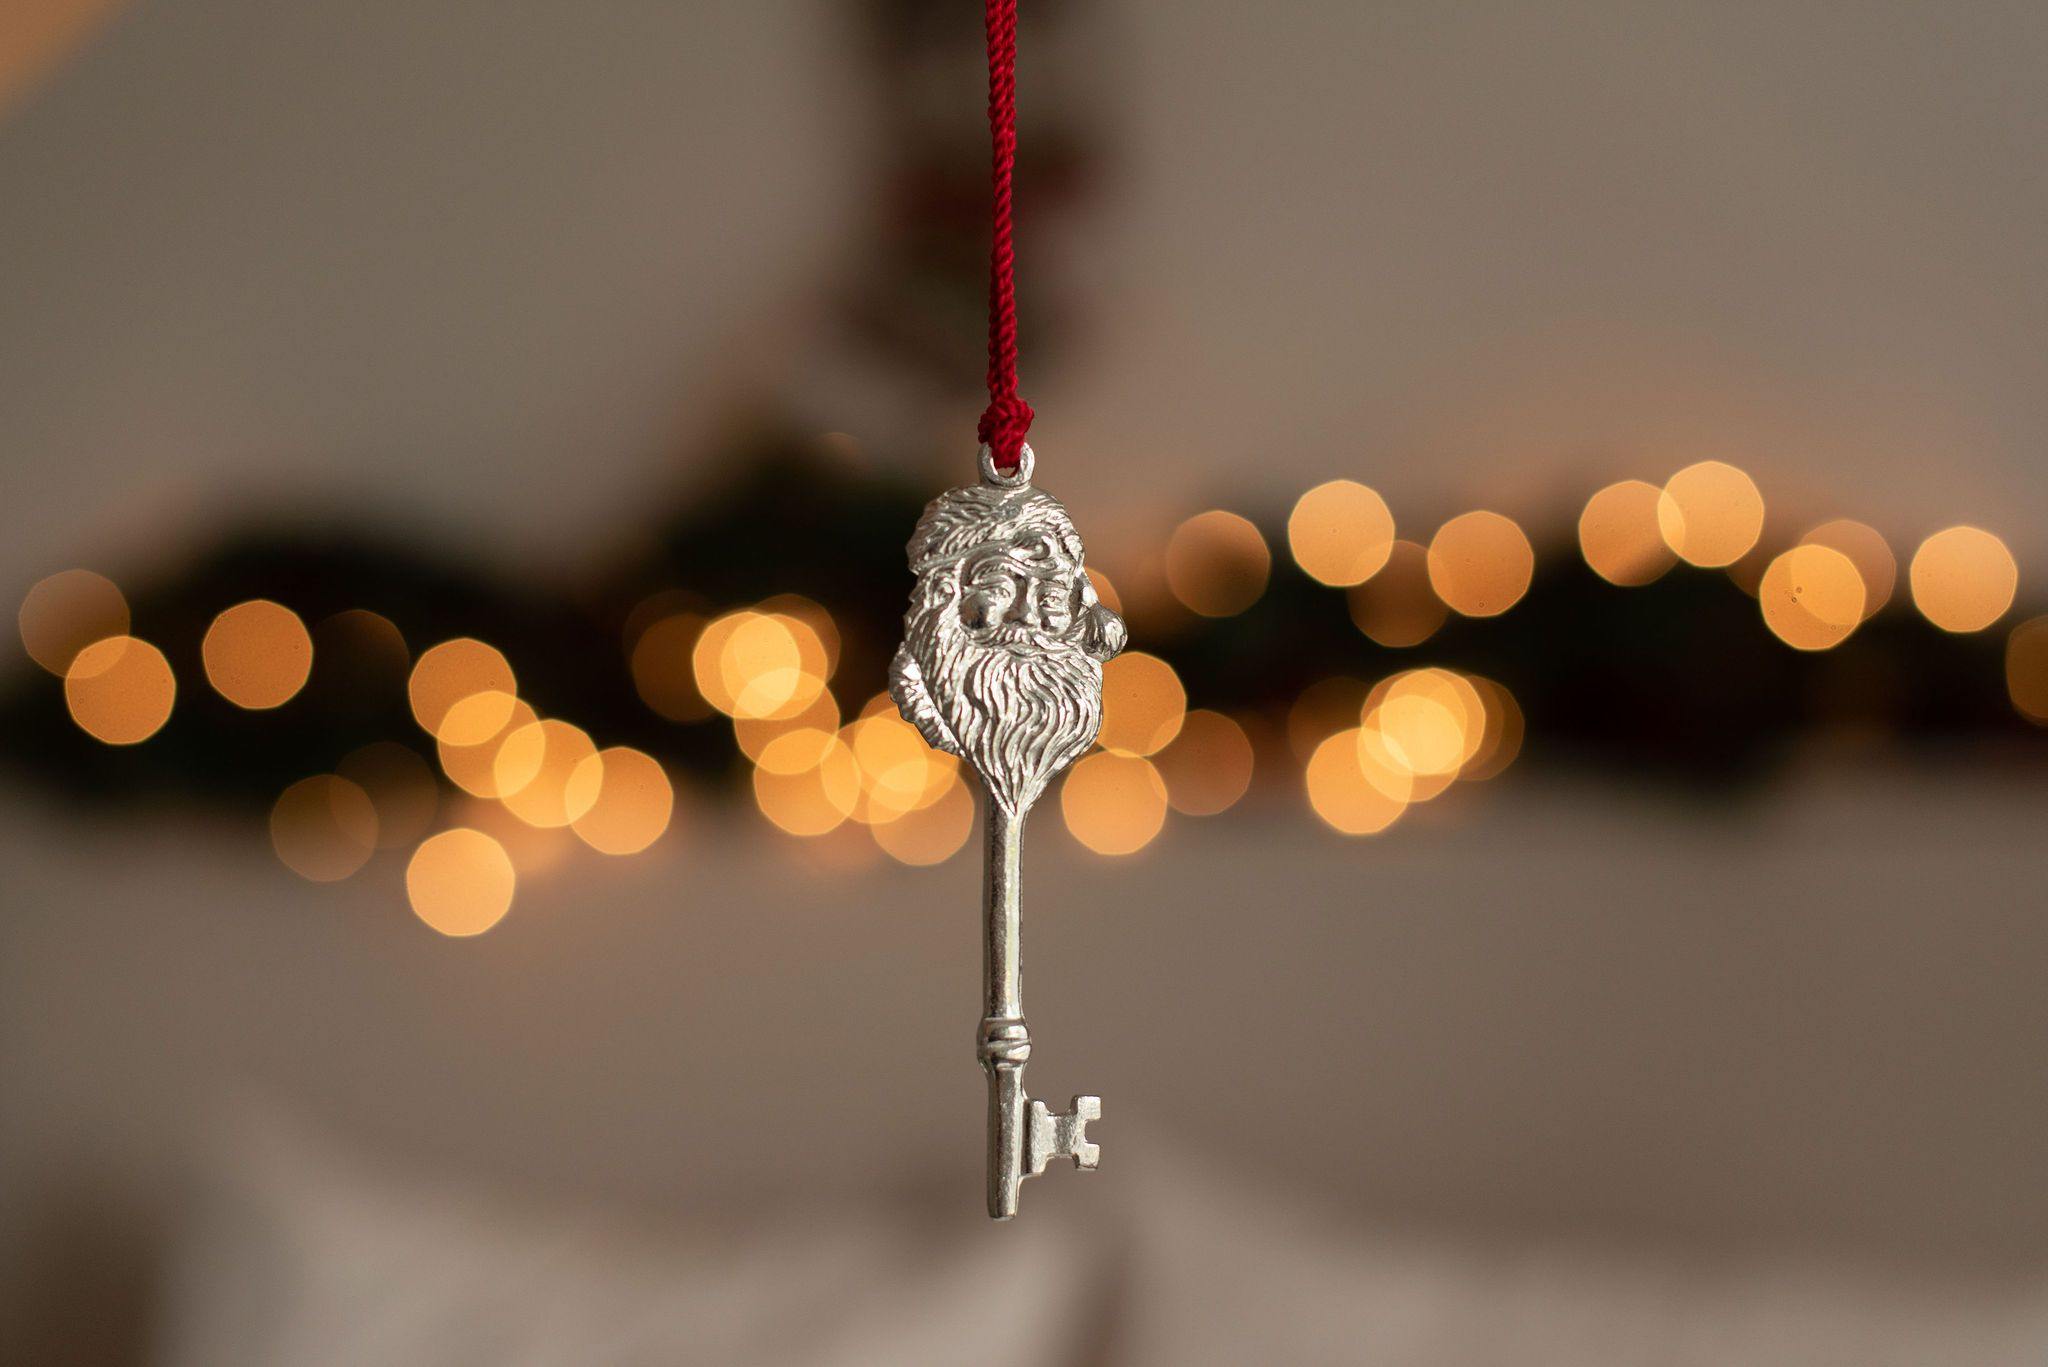 Magical Santa Claus Key - Christmas Eve Ornament for Kids – House of Morgan  Pewter